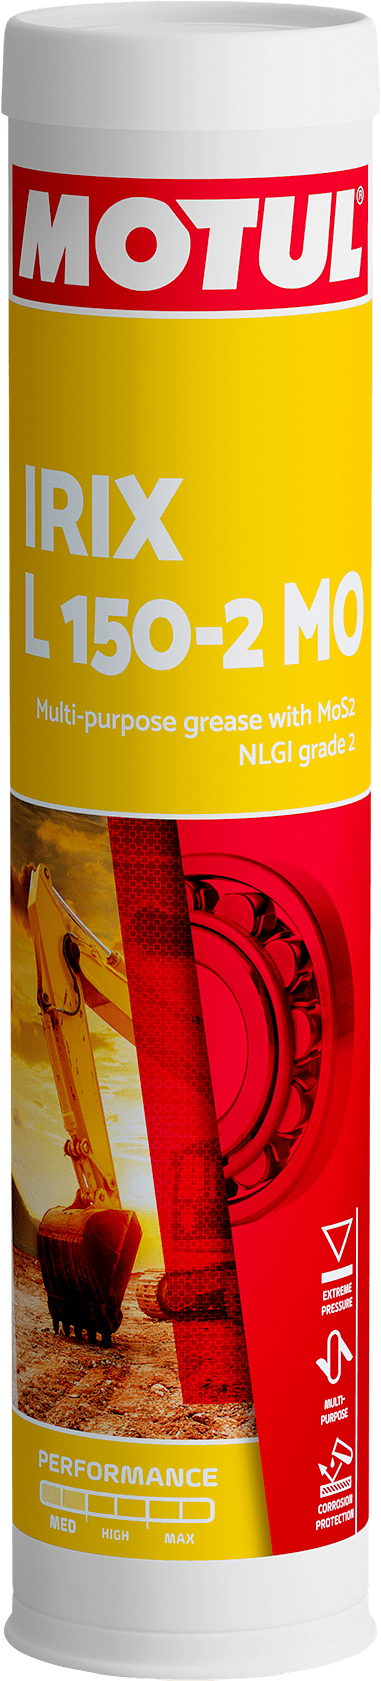 108656-400GR Multipurpose grease specially recommended for civil engineering machinery working in severe conditions: heavy load, repeated shocks, vibrations, presence of water and difficult access for maintenance.